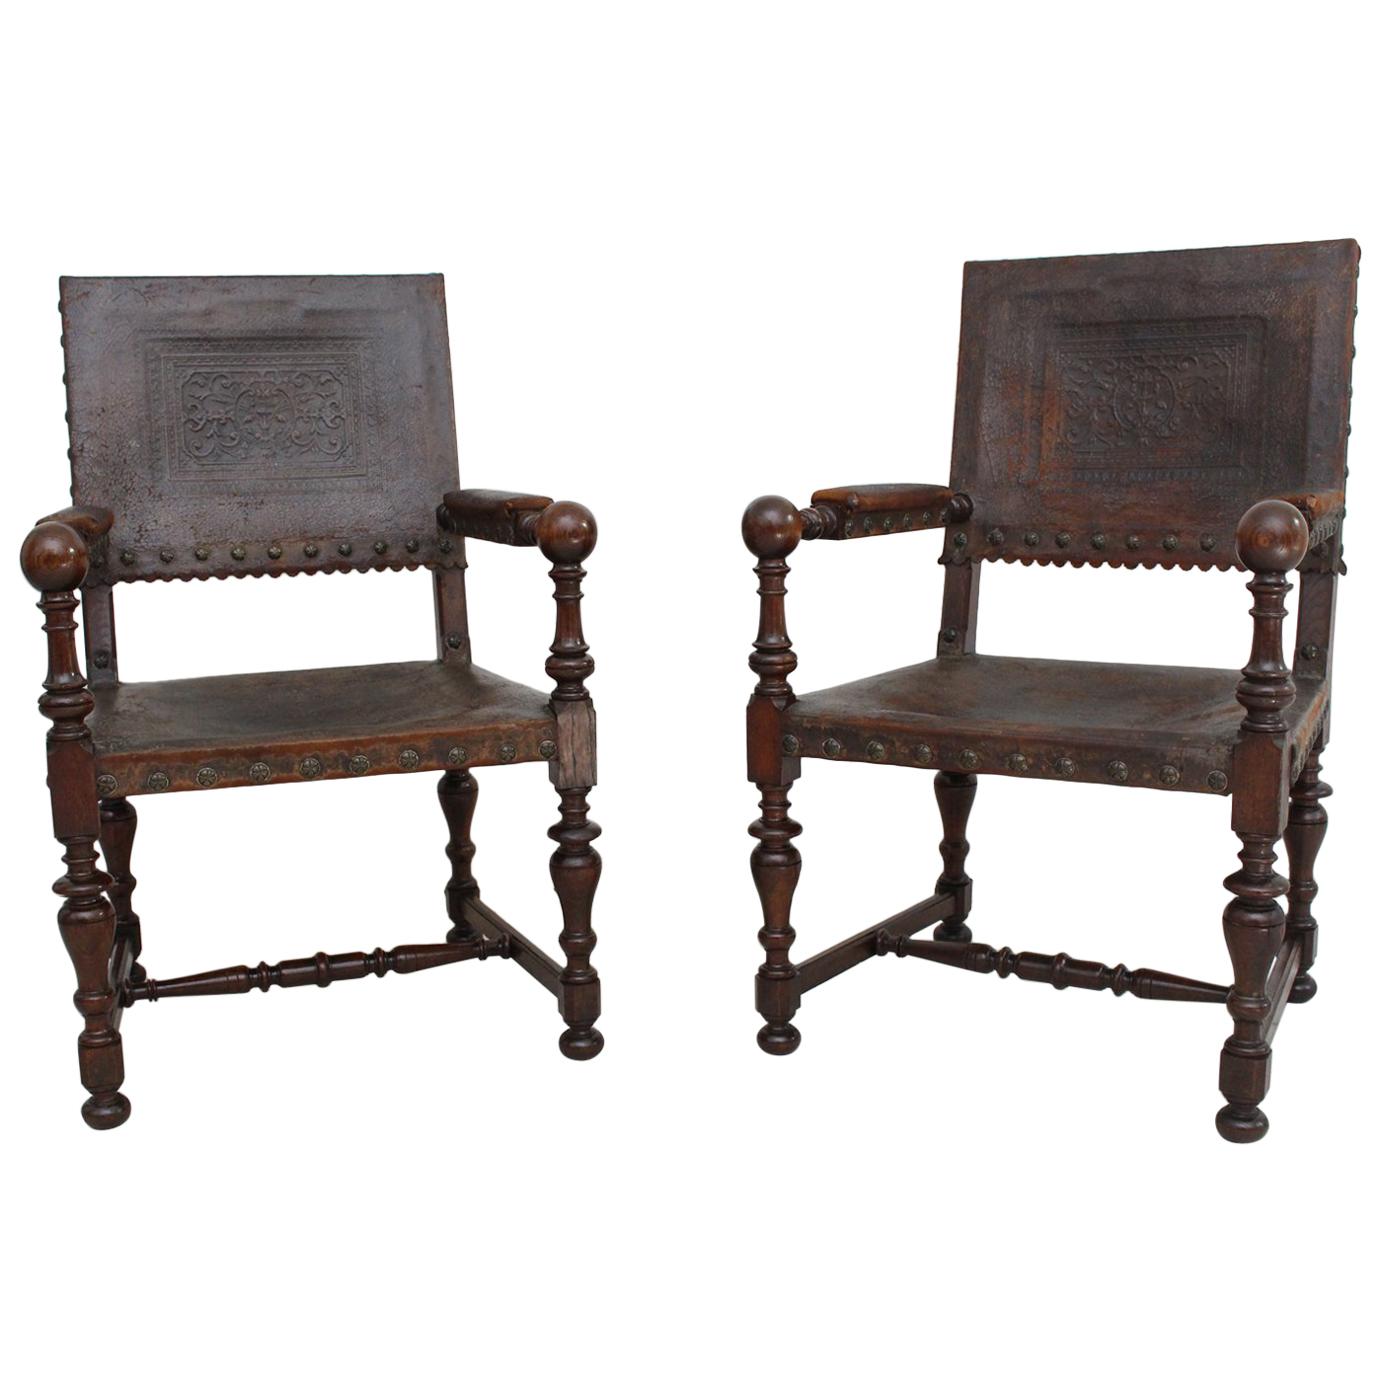 Pair of Early 19th Century Spanish Embossed Leather Armchairs